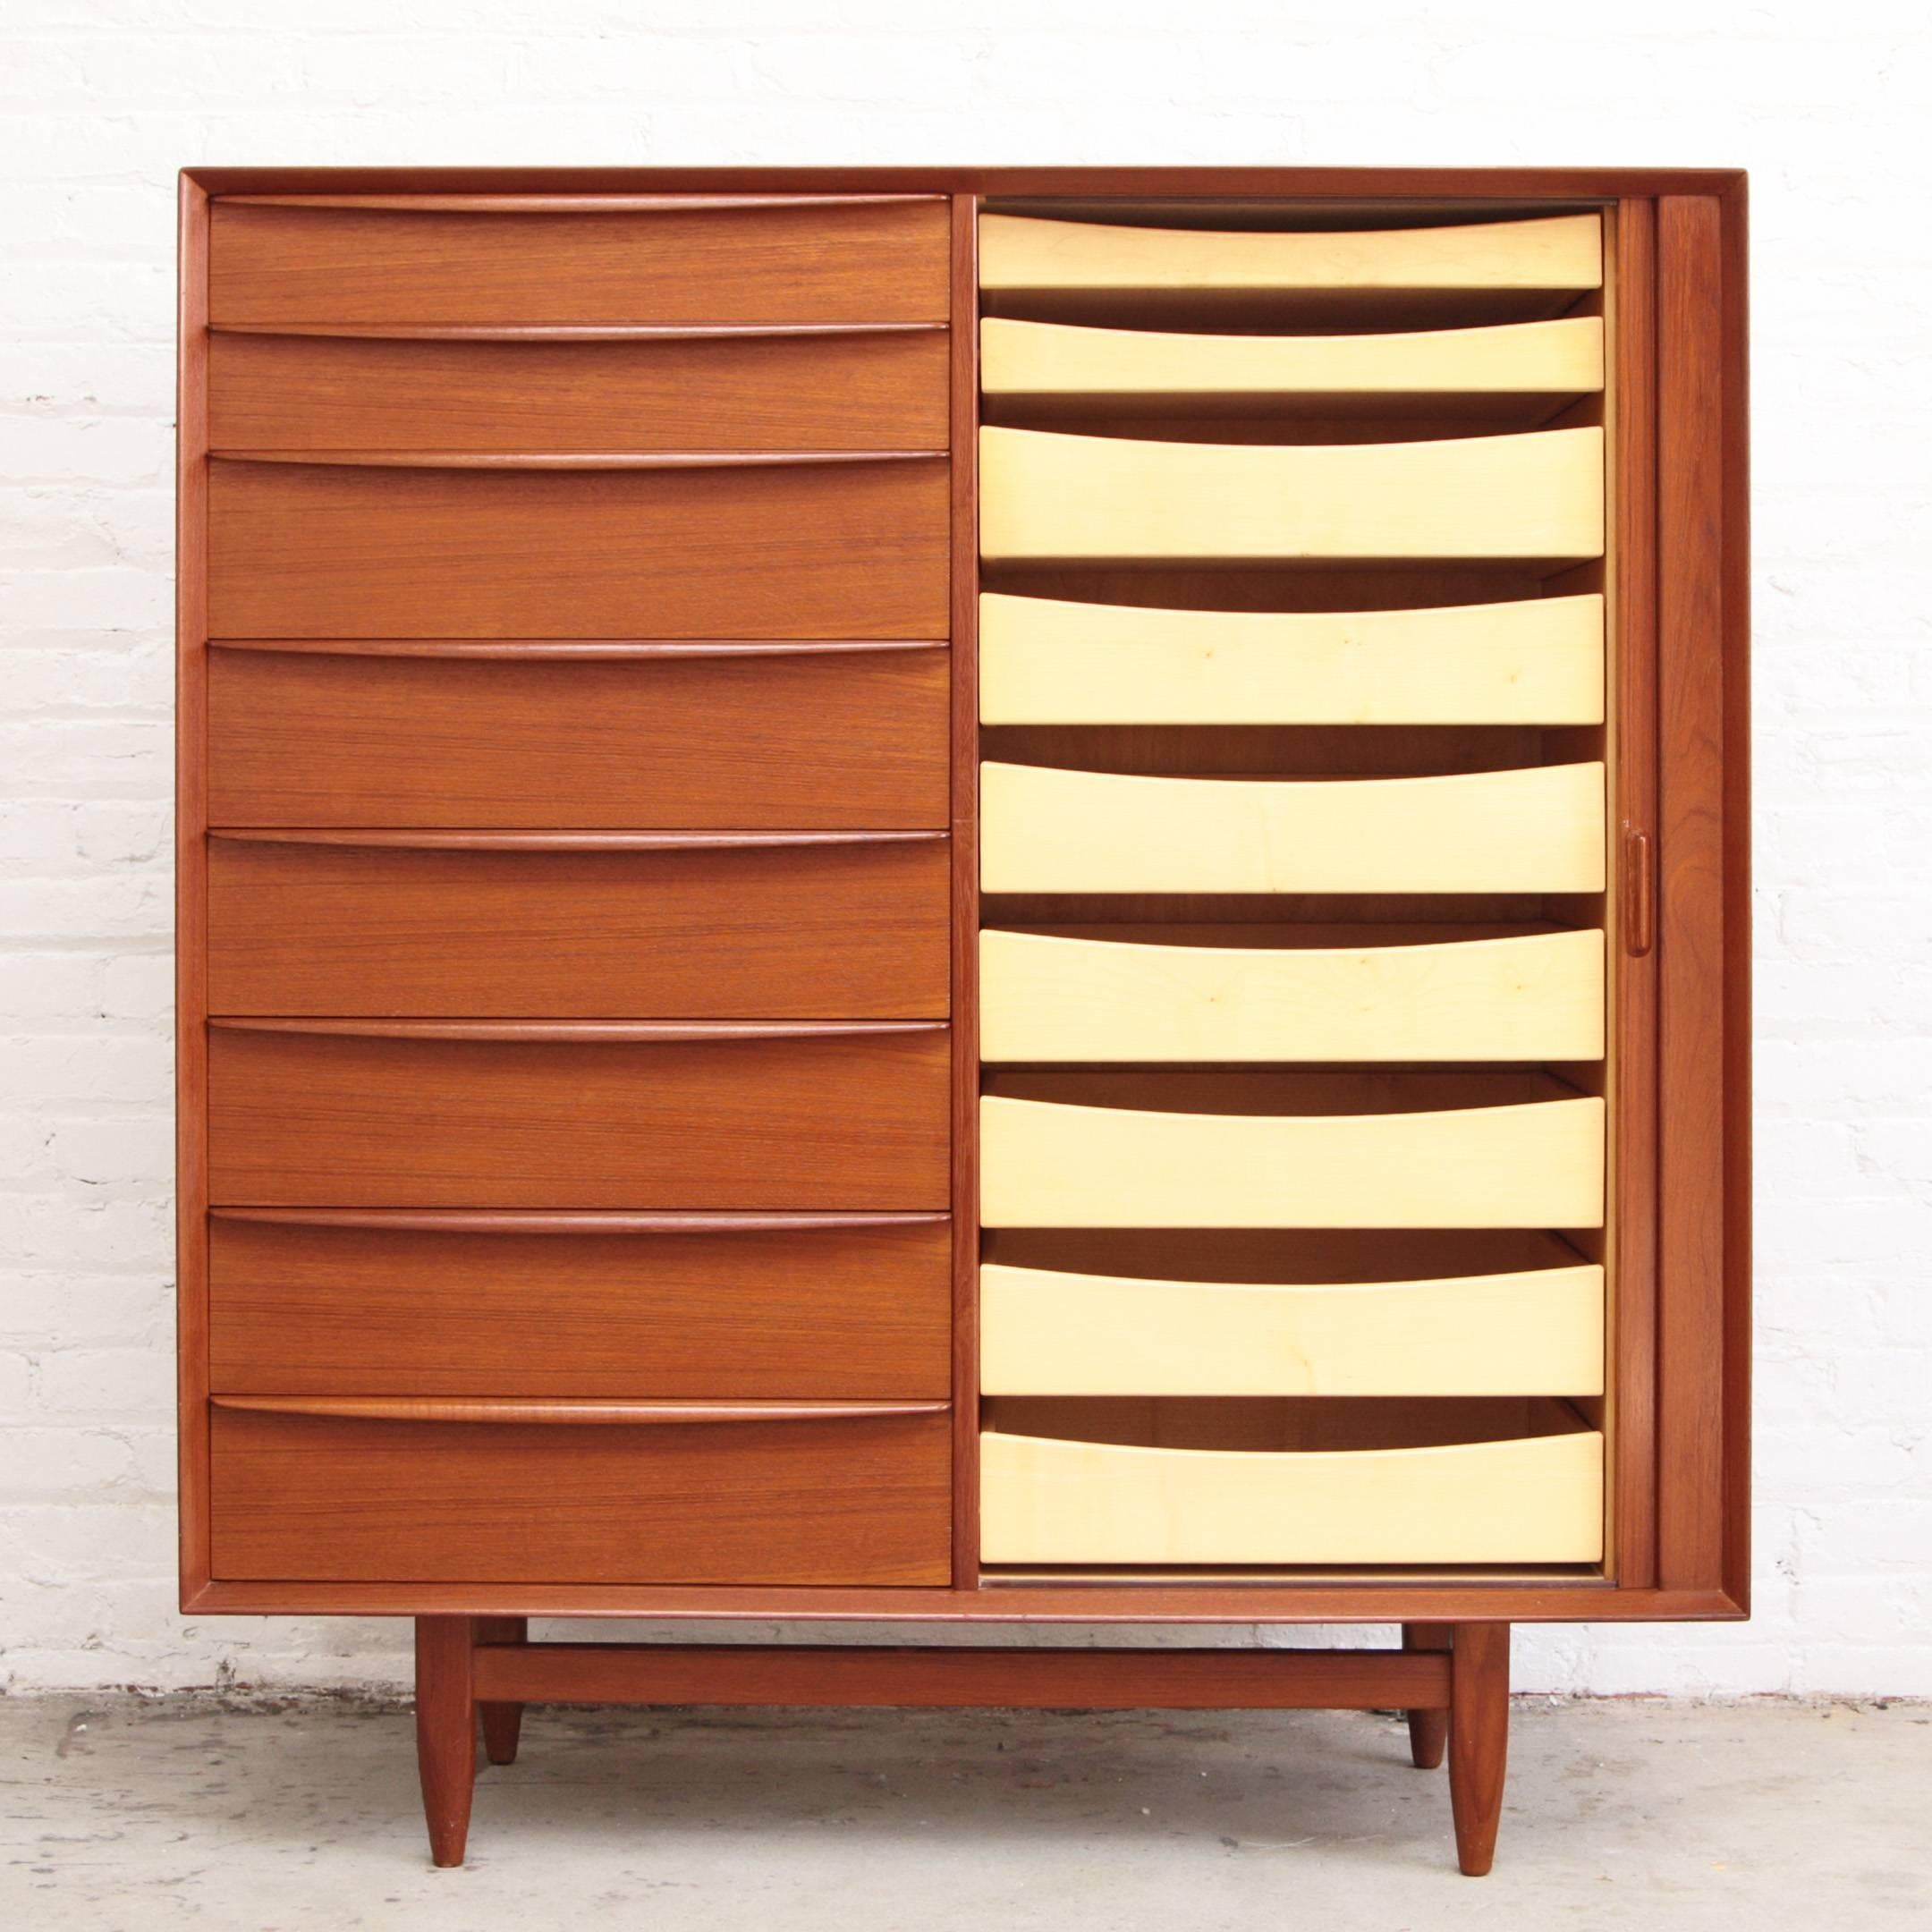 Svend Madsen for Falster tall chest of drawers, made in Denmark. Teak exterior, sculpted drawer pulls and tambour door. Blonde birch interior drawers.